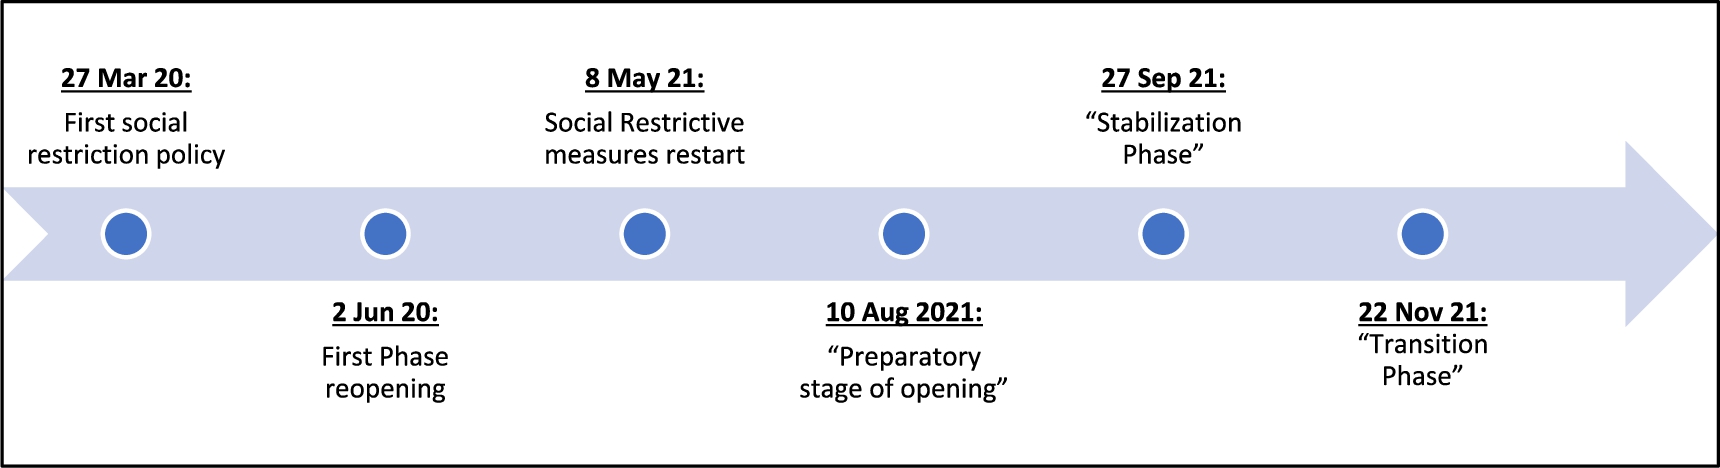 COVID-19 timeline in Singapore. Source: [6,13].